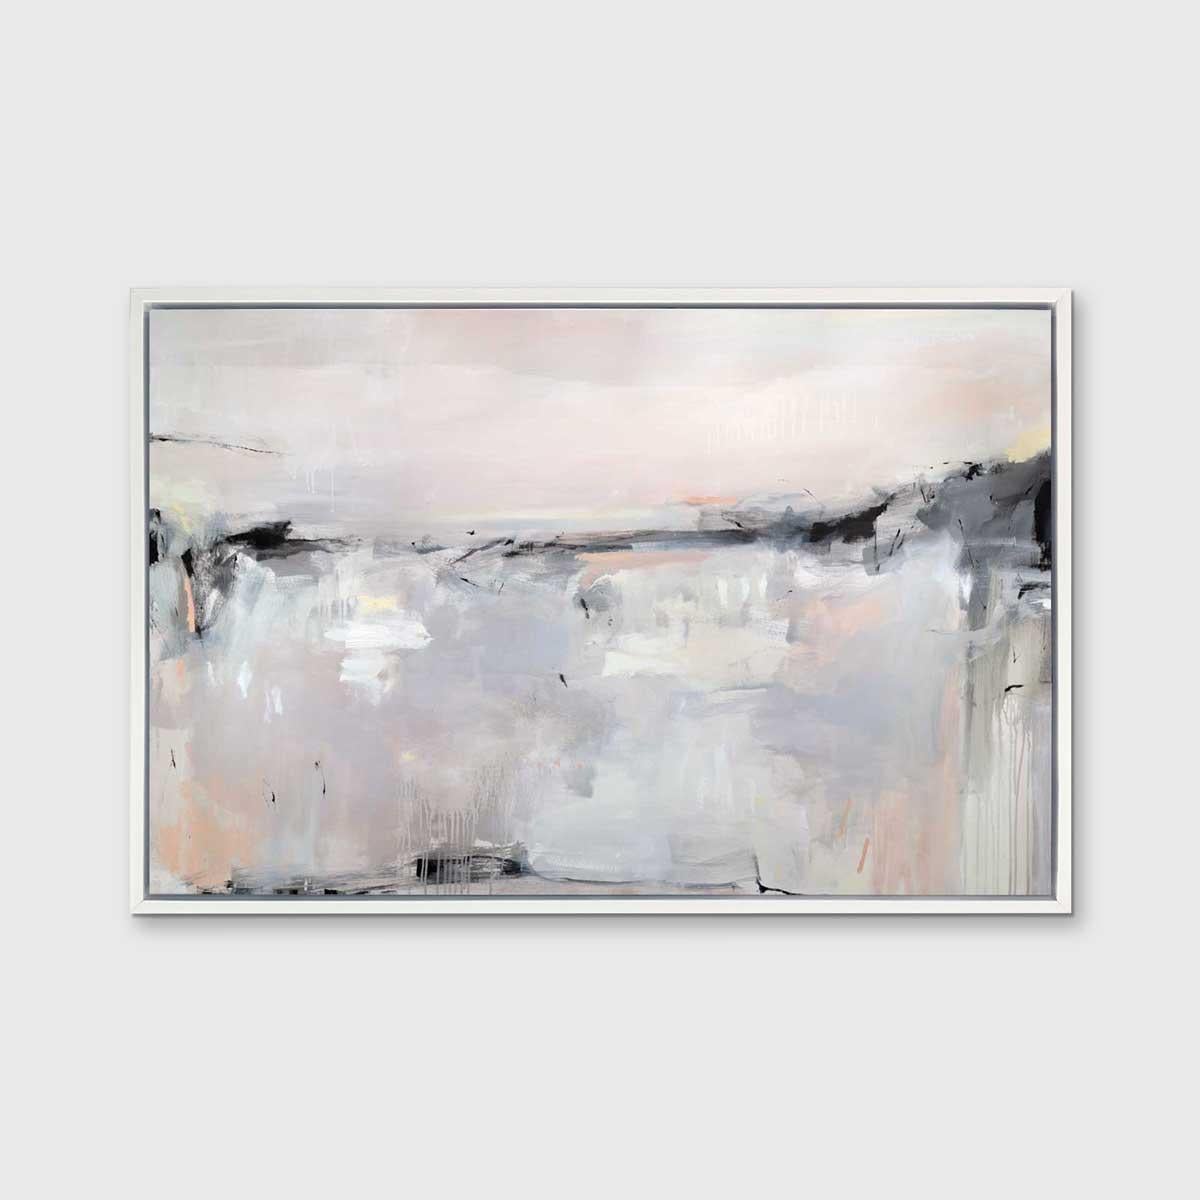 This contemporary abstract Limited Edition giclee print by Kelly Rossetti is made with acrylic paint on canvas. It features a light, warm, and neutral palette, with grey, white, and pink tones contrasted by deep charcoal black, with a loose,